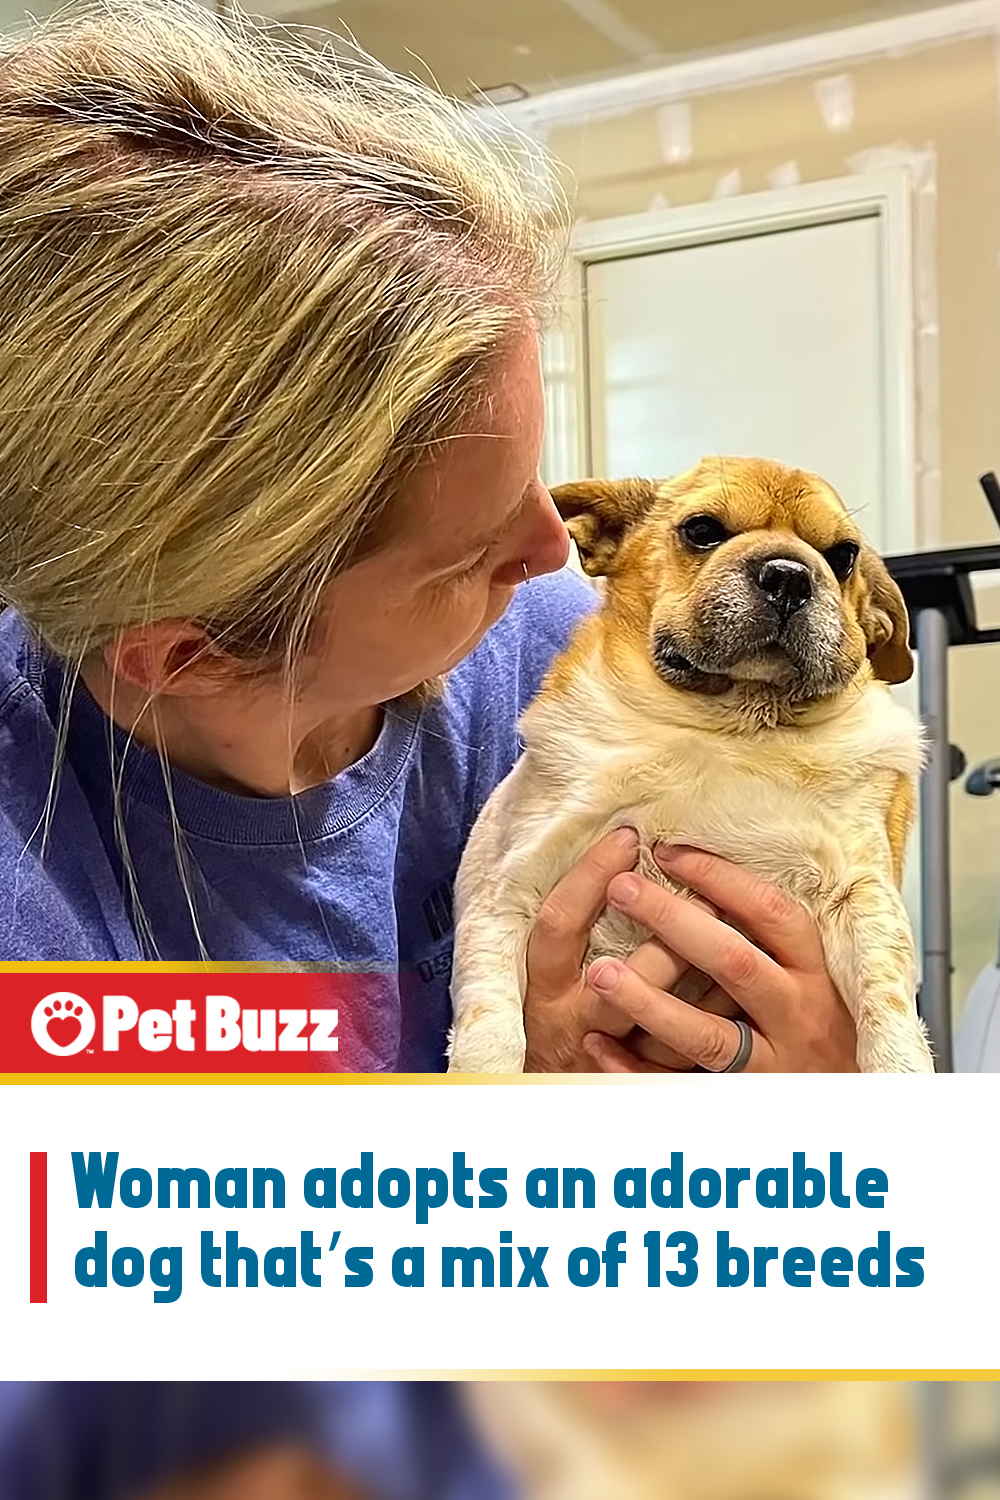 Woman adopts an adorable dog that’s a mix of 13 breeds